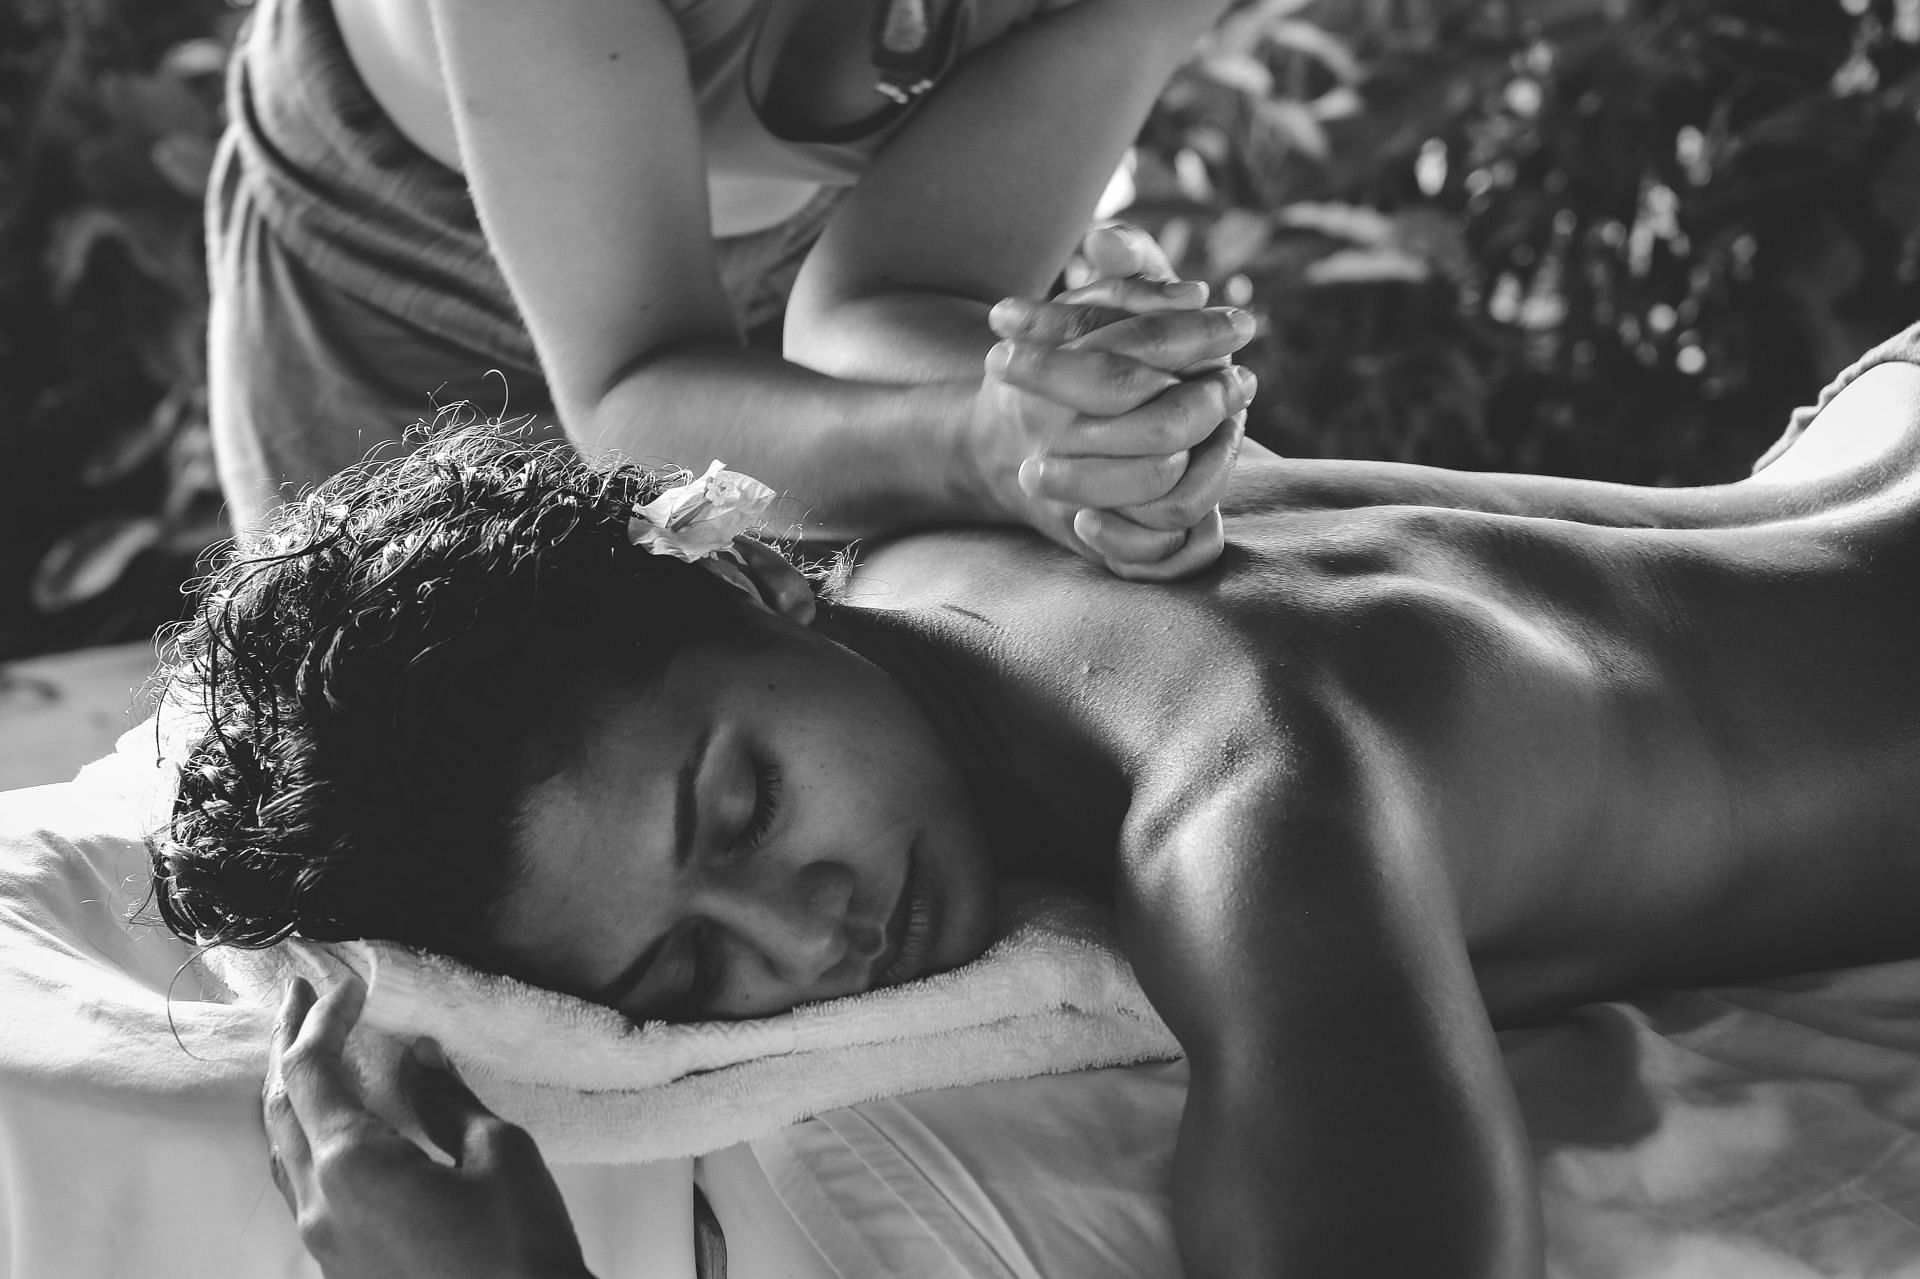 Treating yourself to a nice massage is one of the best ways to combat anxiety and stress. (Image via Unsplash/Ale Romo)